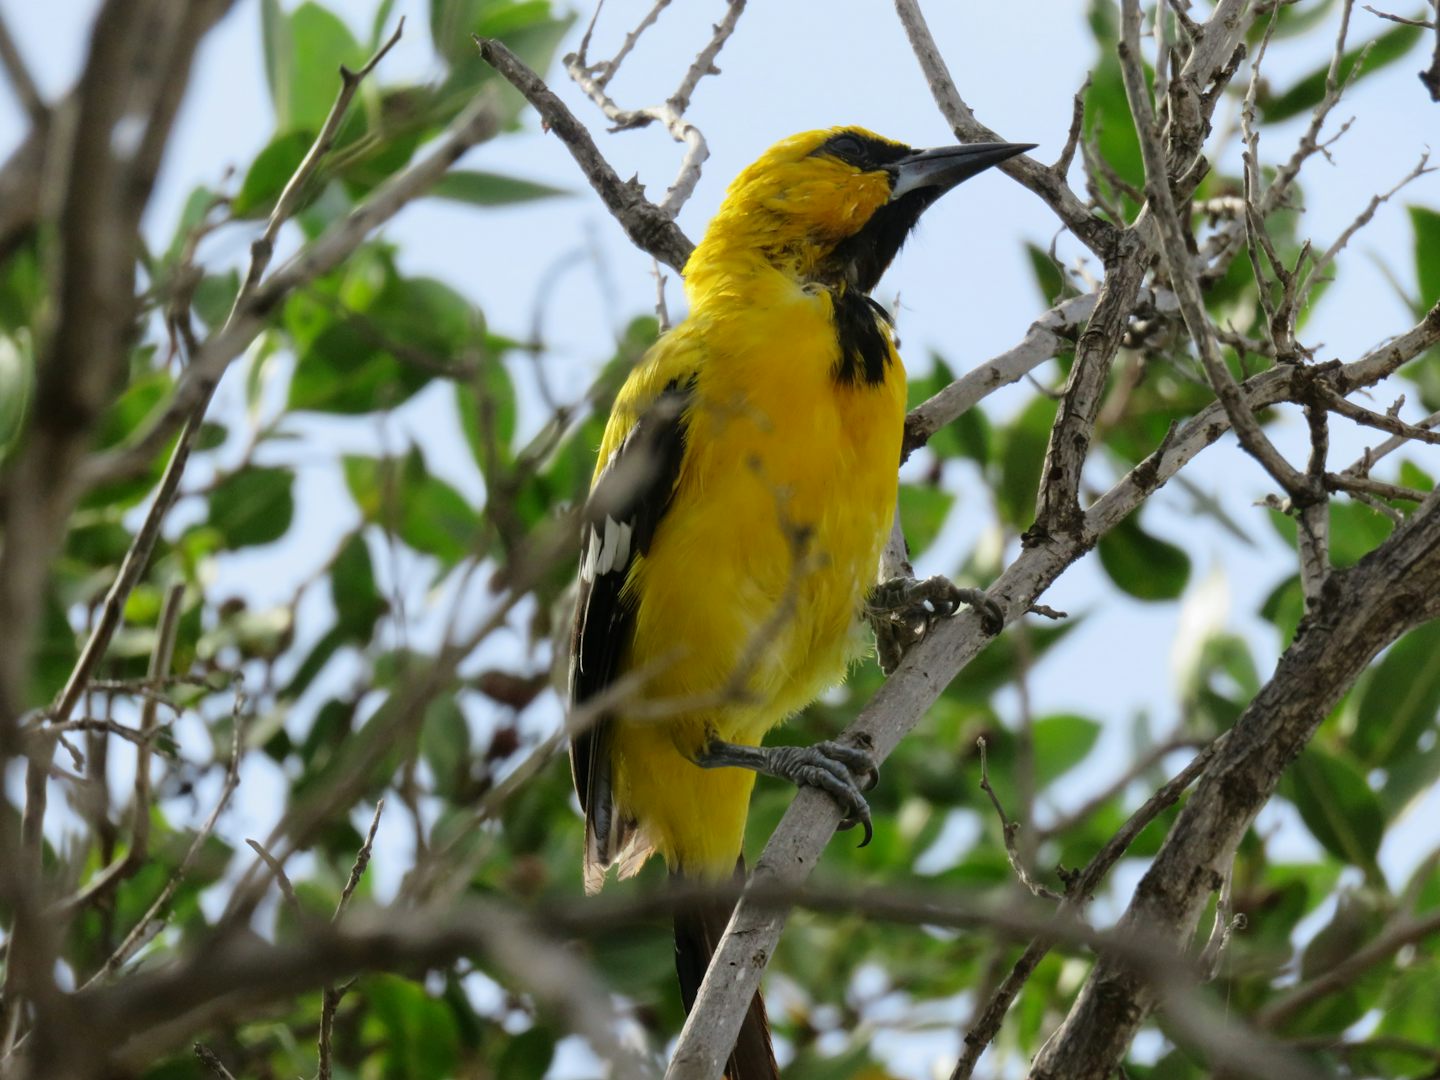 A bird I photographed in Bonaire.